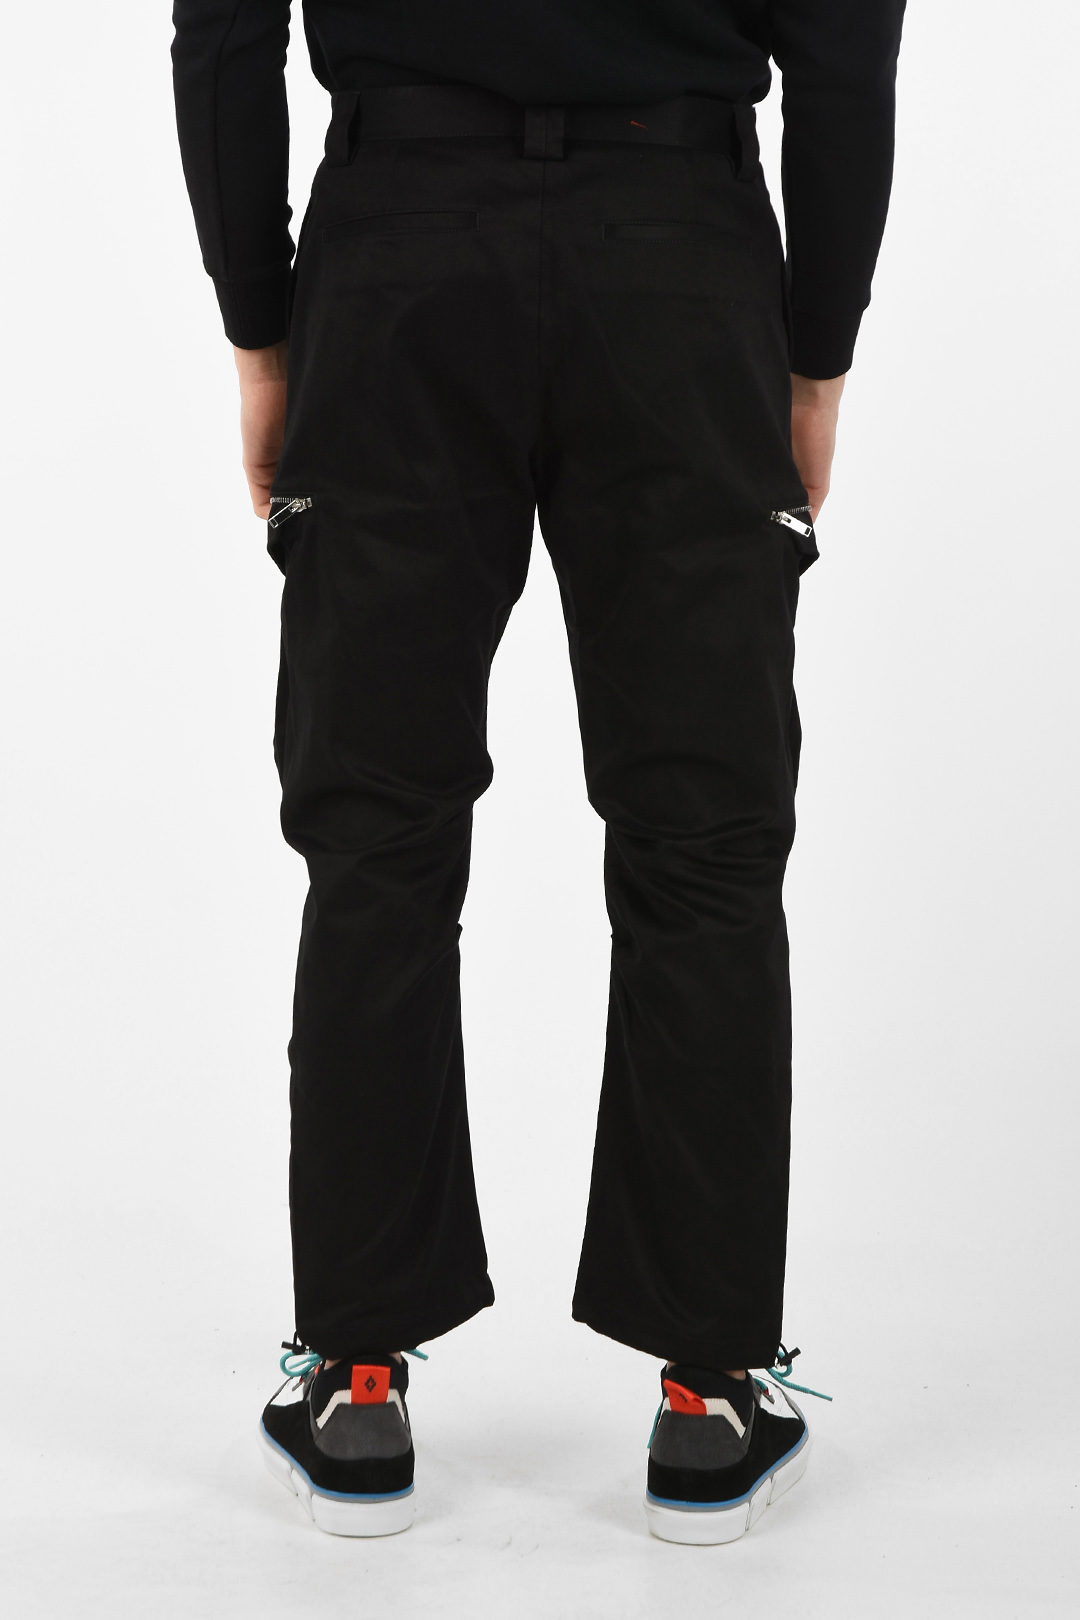 Womens Clothing Trousers Marcelo Burlon Printed Stretch-cotton Twill Cargo Pants in Black Slacks and Chinos Cargo trousers 